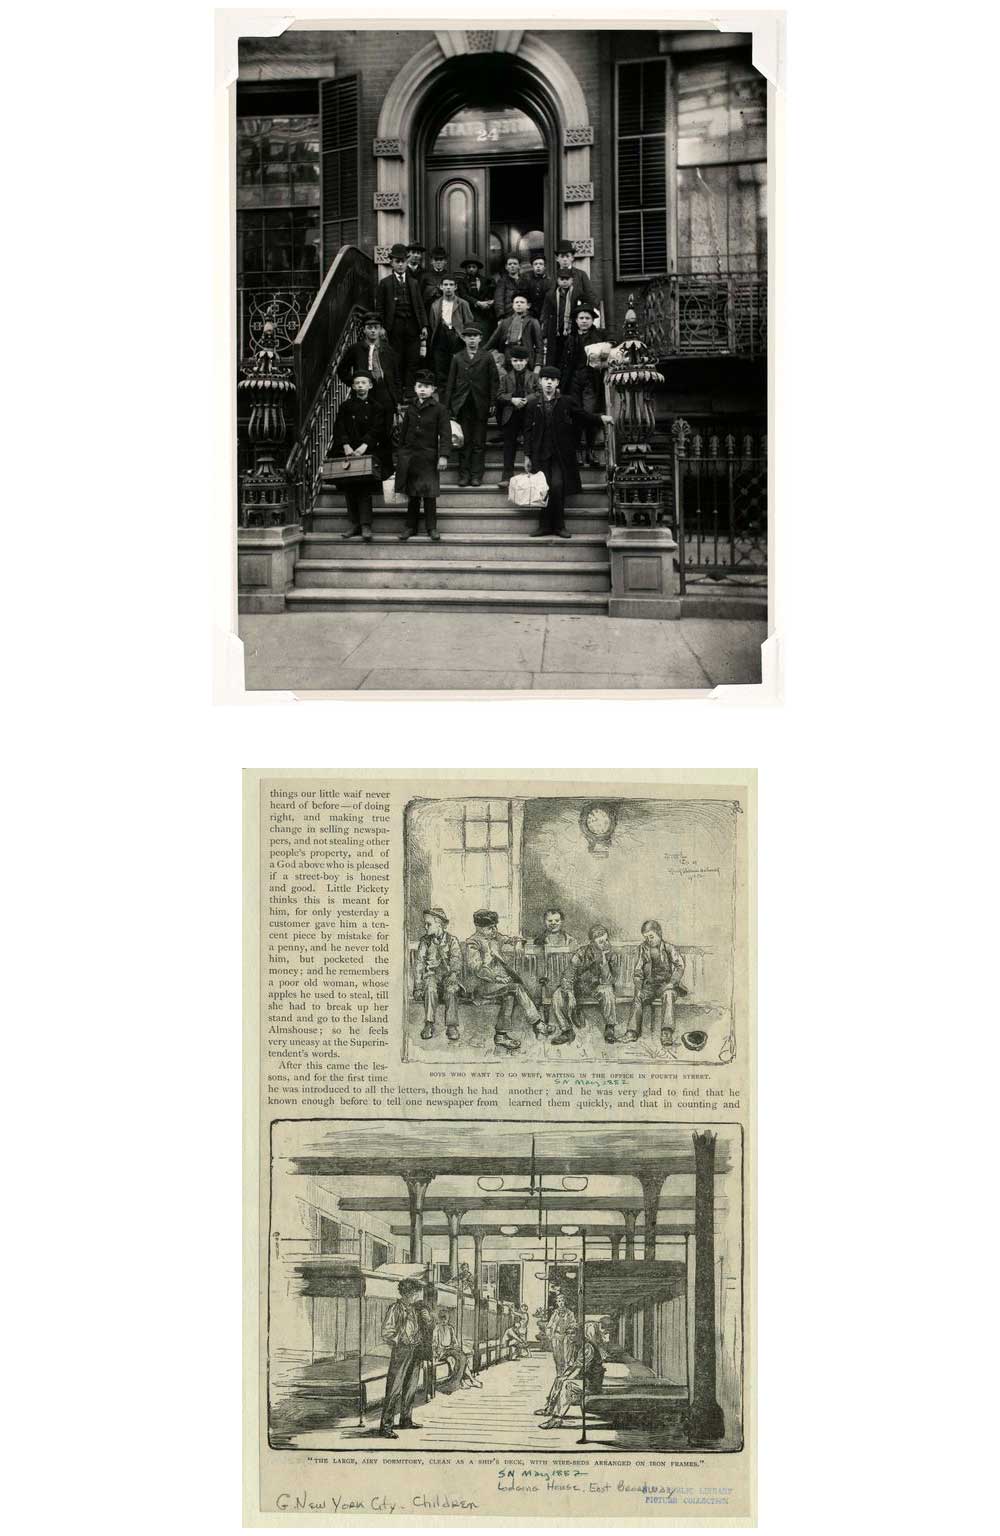 Top: Children’s Aid Society: Going West, by Jacob Riis, c. 1888. Bottom: Boys who want to go west, waiting in the office in Fourth Street, 1882.